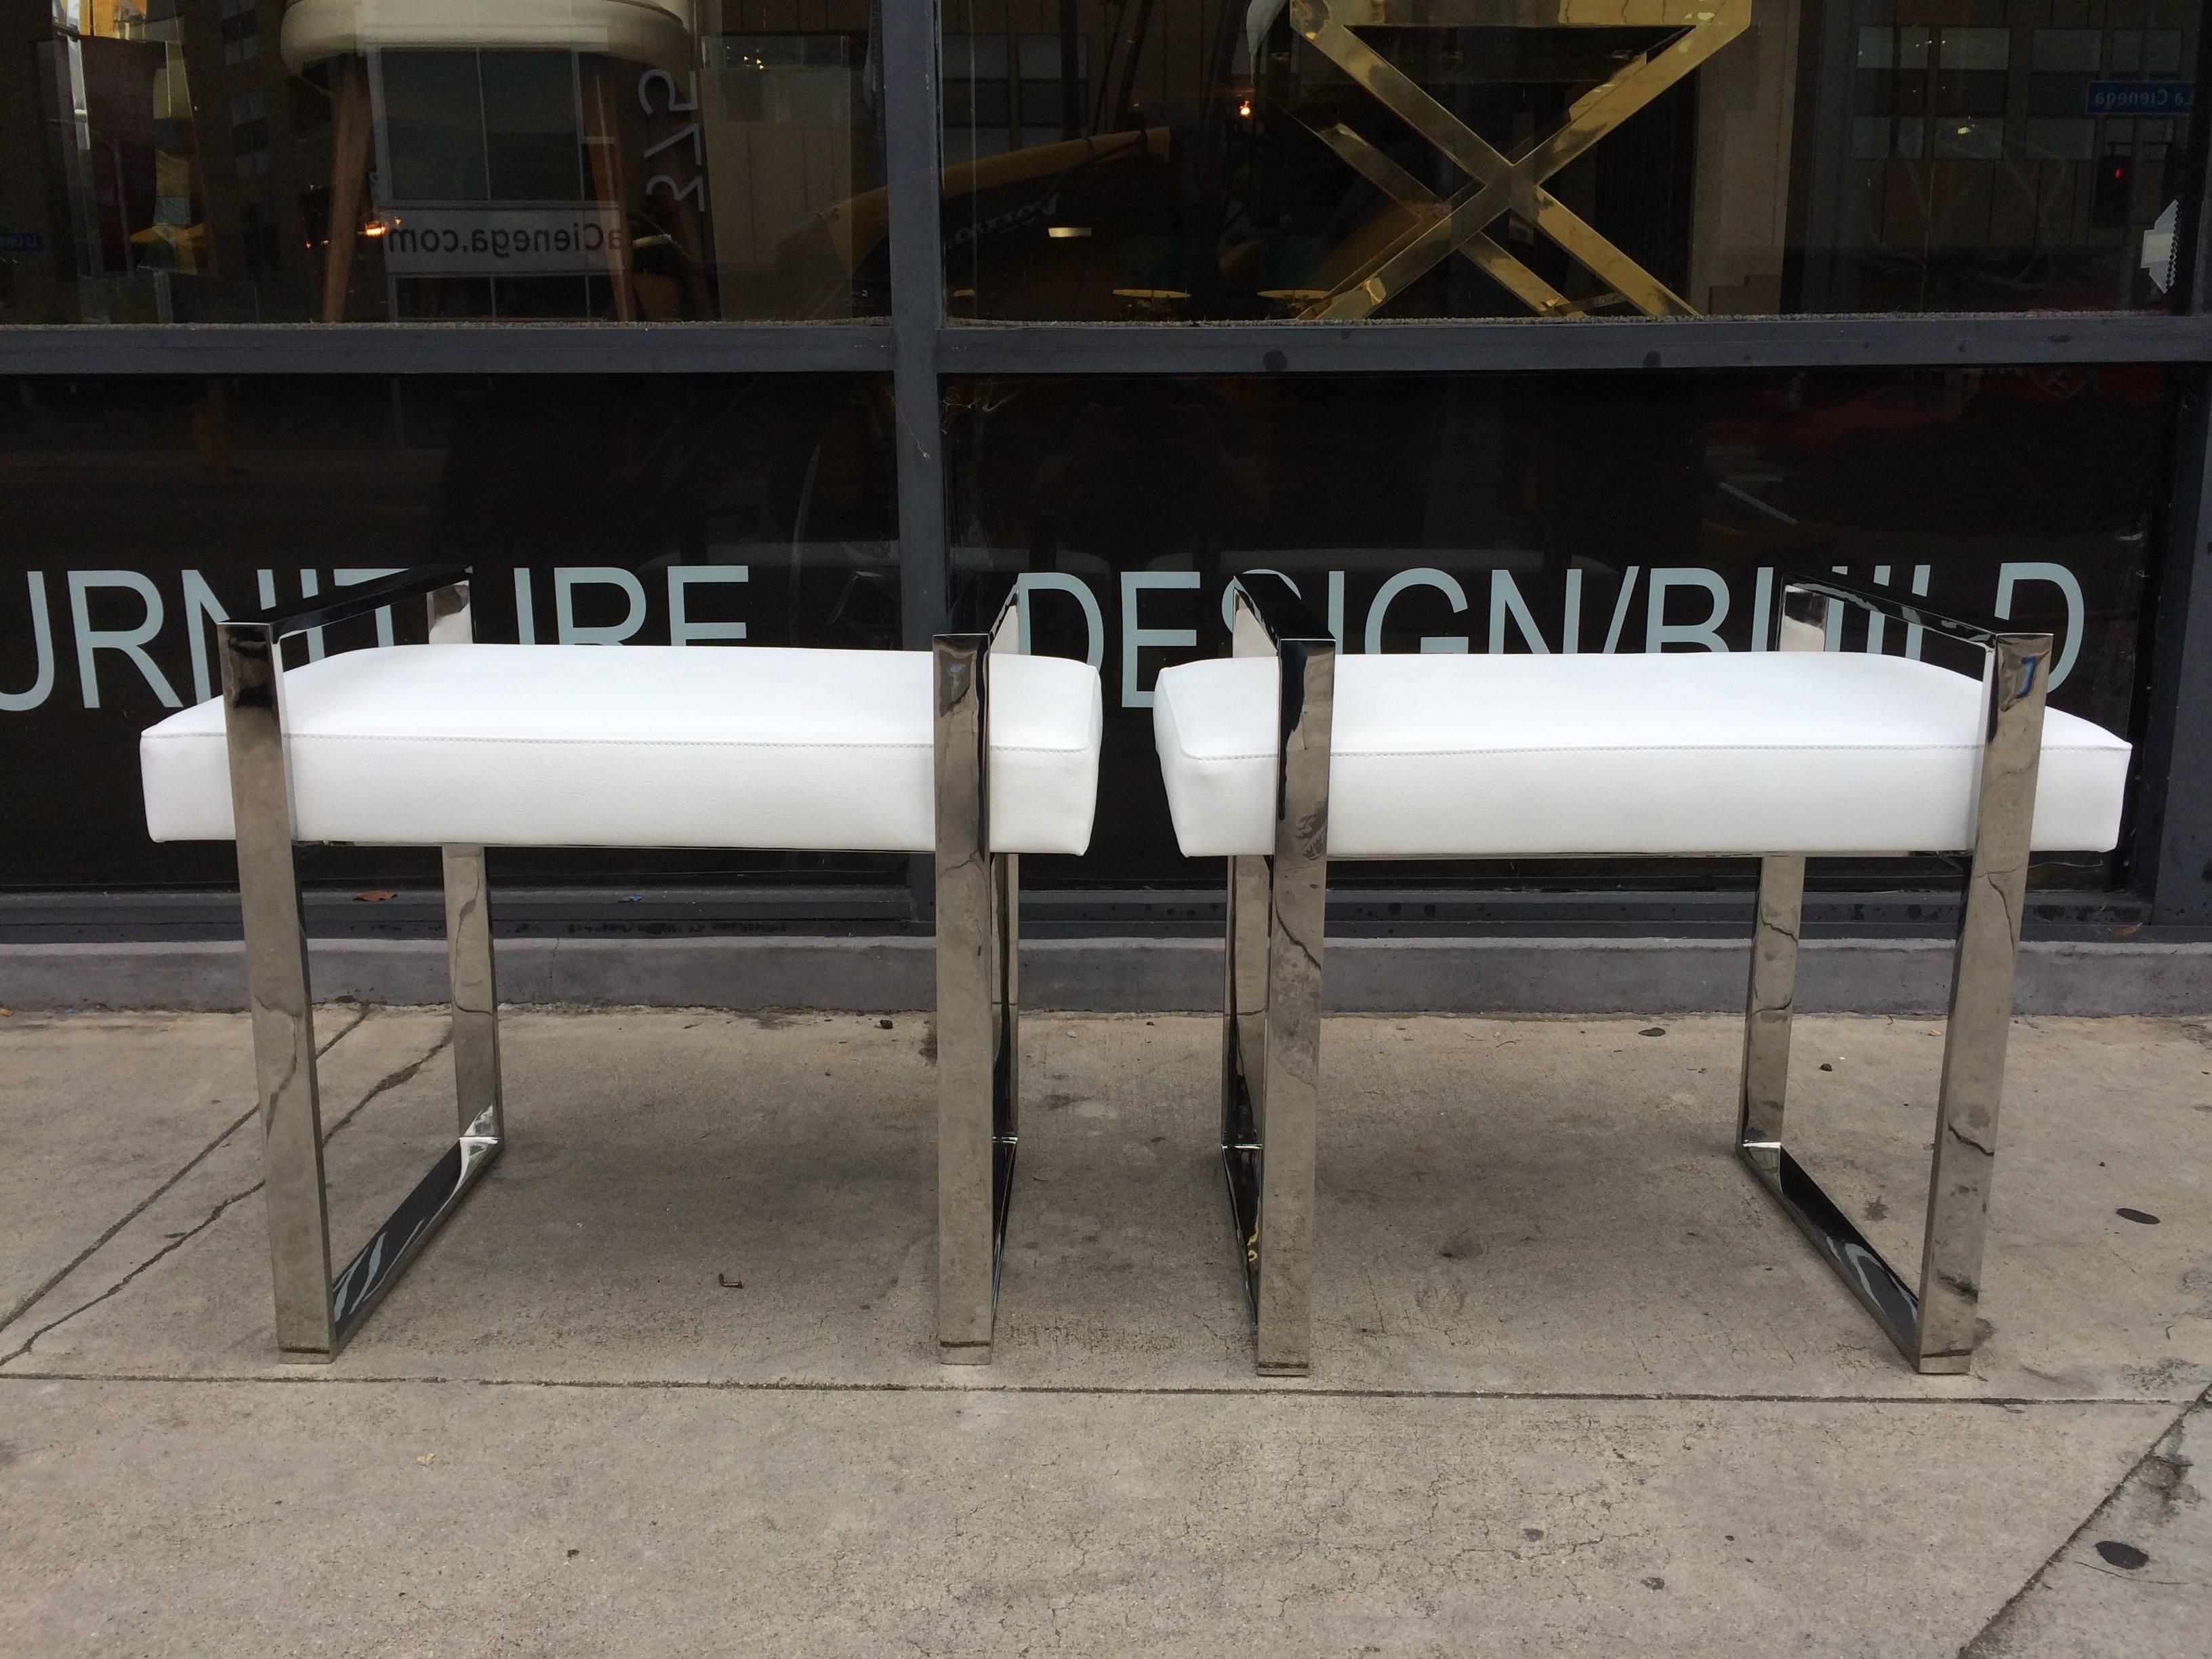 Pair of polished nickel benches designed and manufactured by Charles Hollis Jones in the 1970s.

The frames of the benches are made in solid steel and nickel-plated, they are upholstered in white Naugahyde but they are also available in other